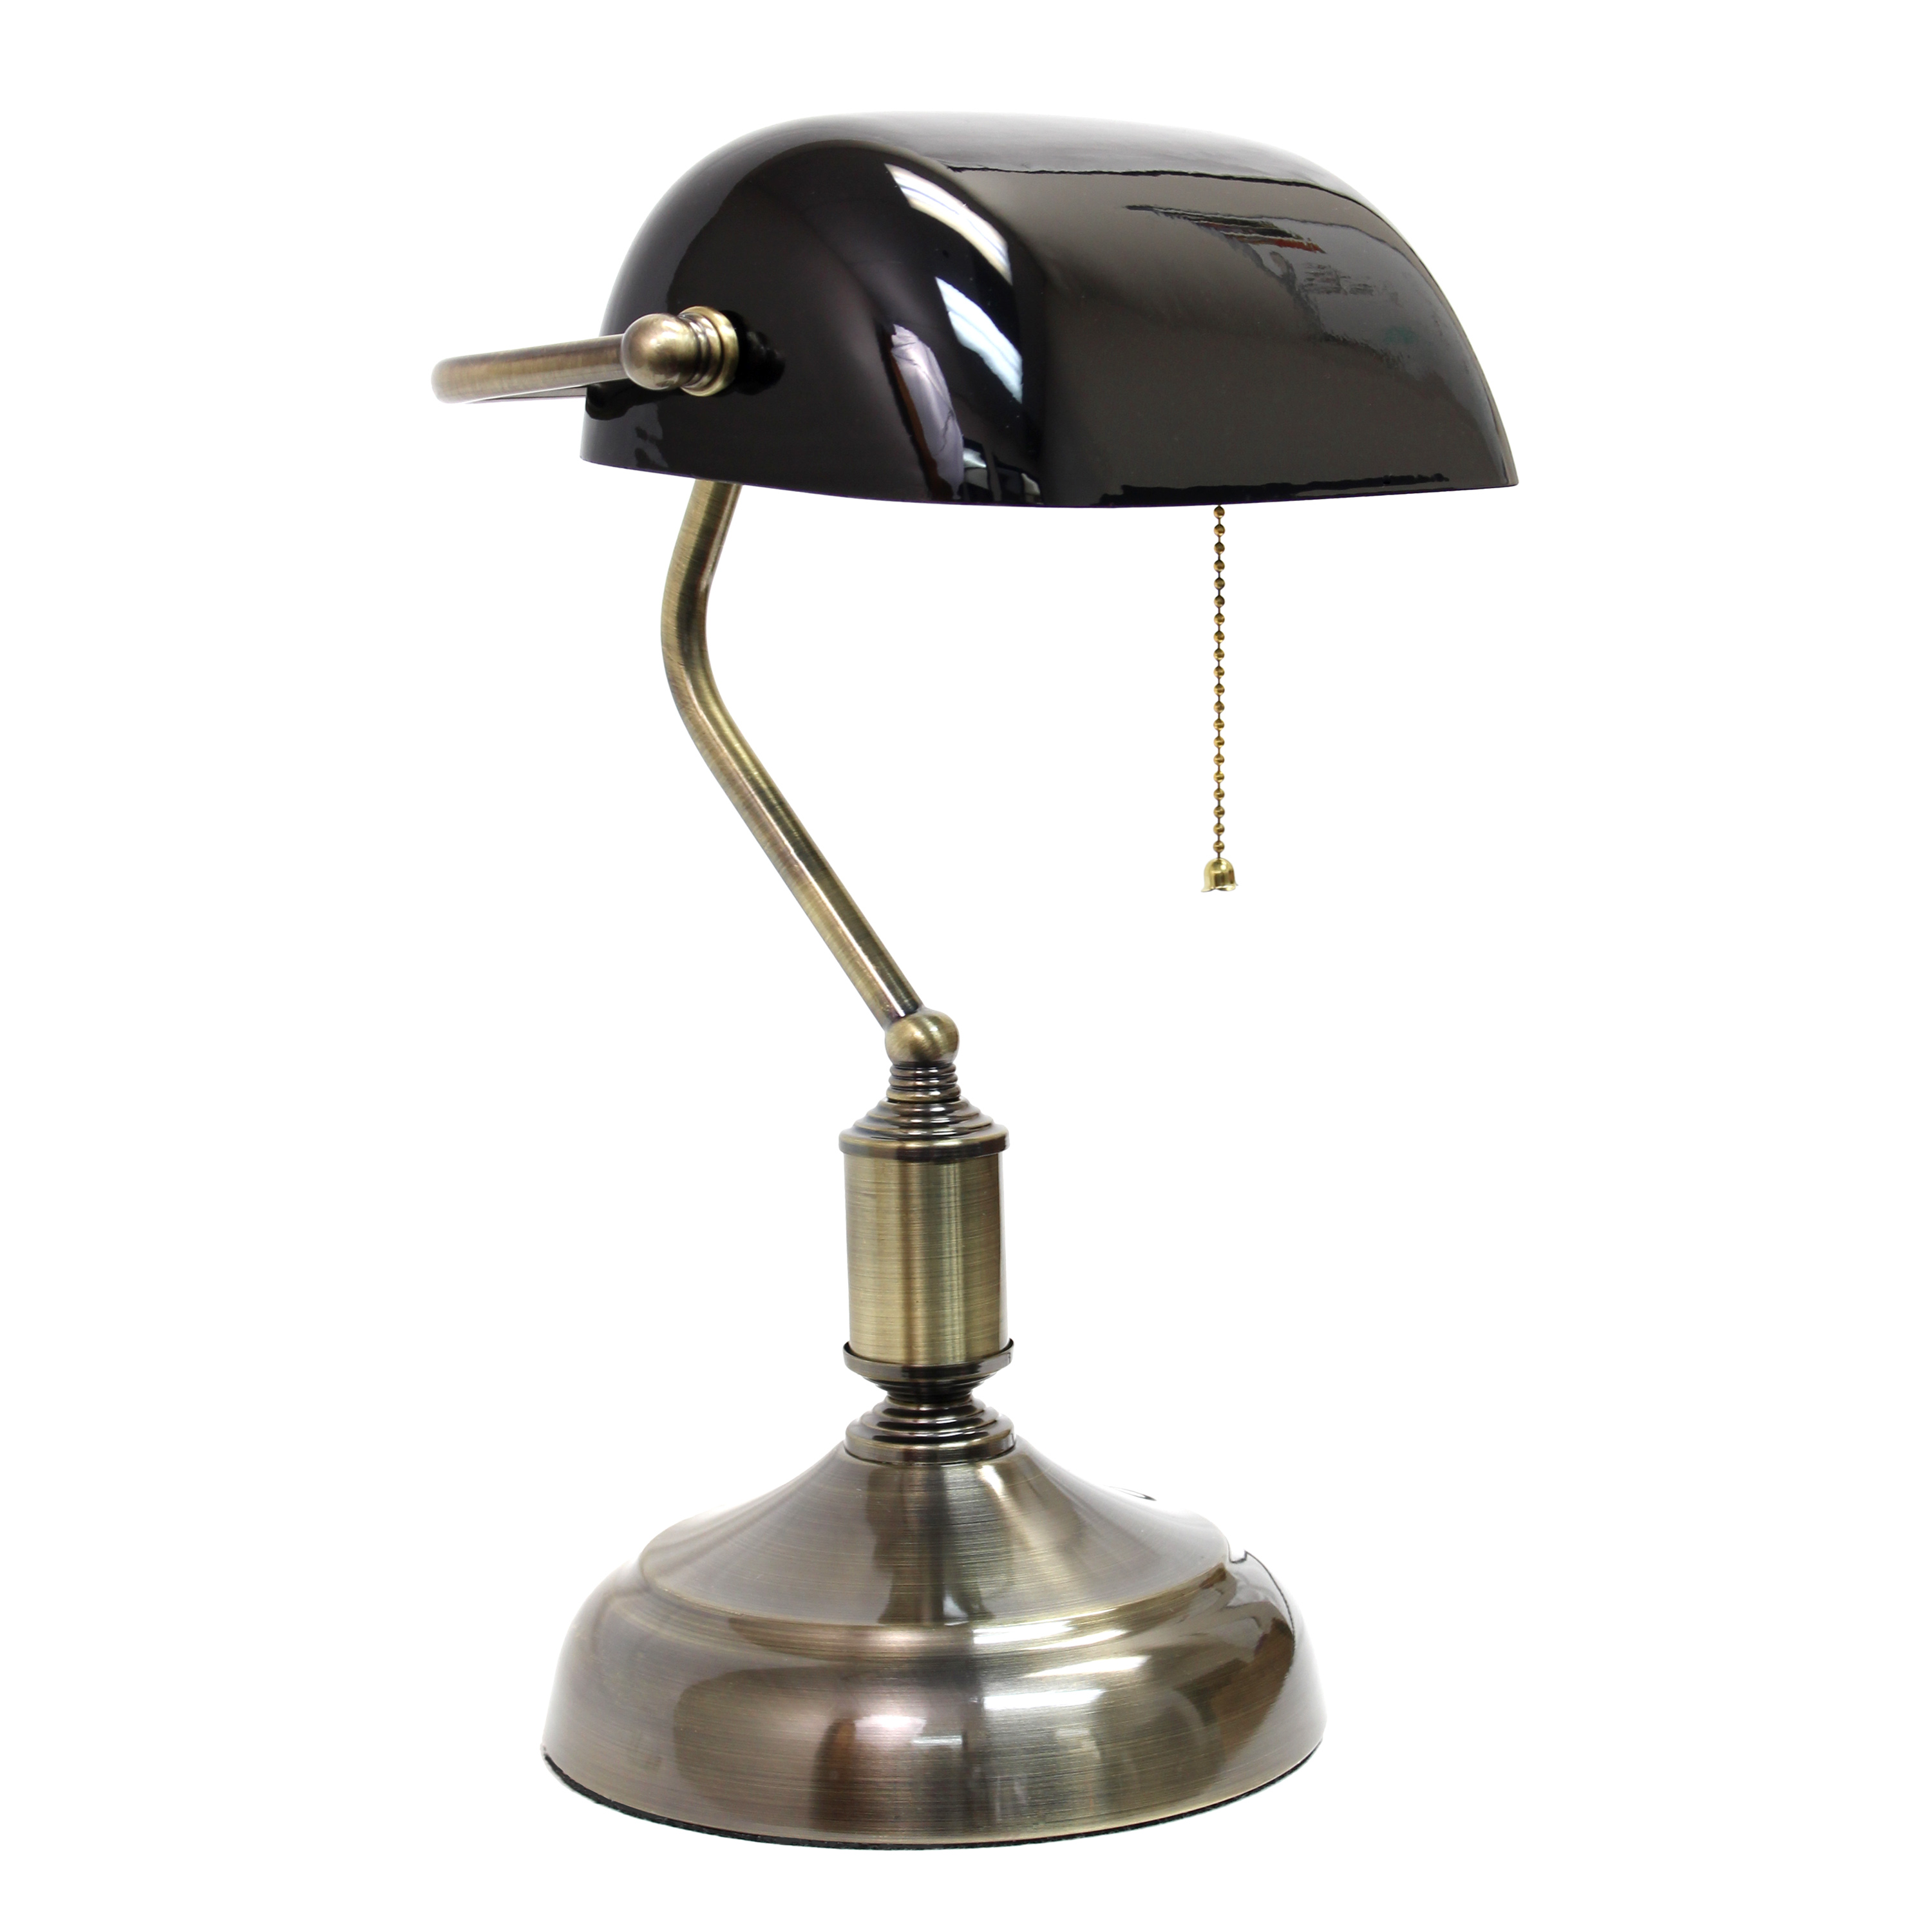 Simple Designs Executive Banker's Desk Lamp with Glass Shade, Black